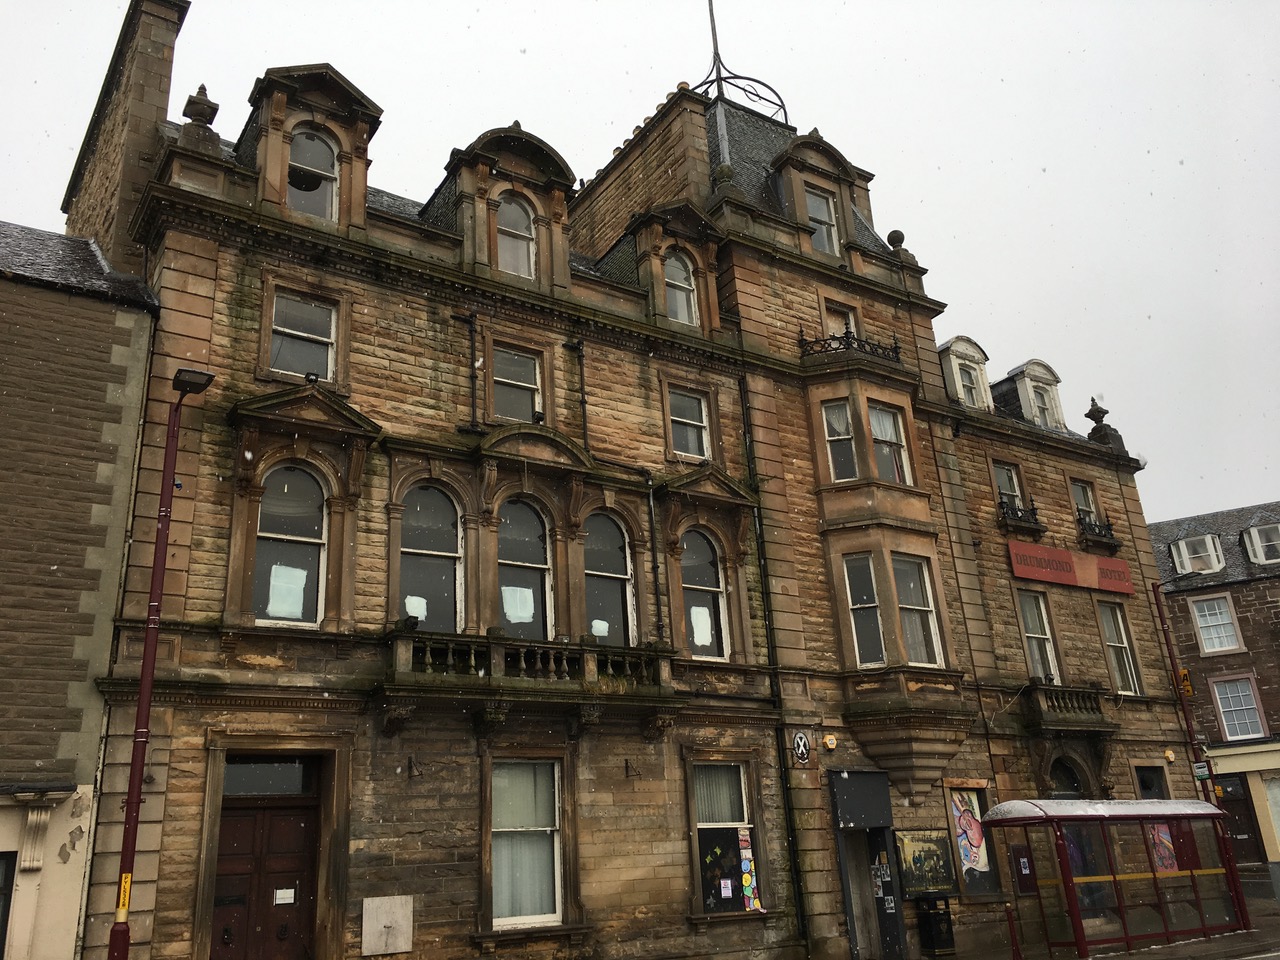 Update on the Drummond Arms Hotel, Crieff